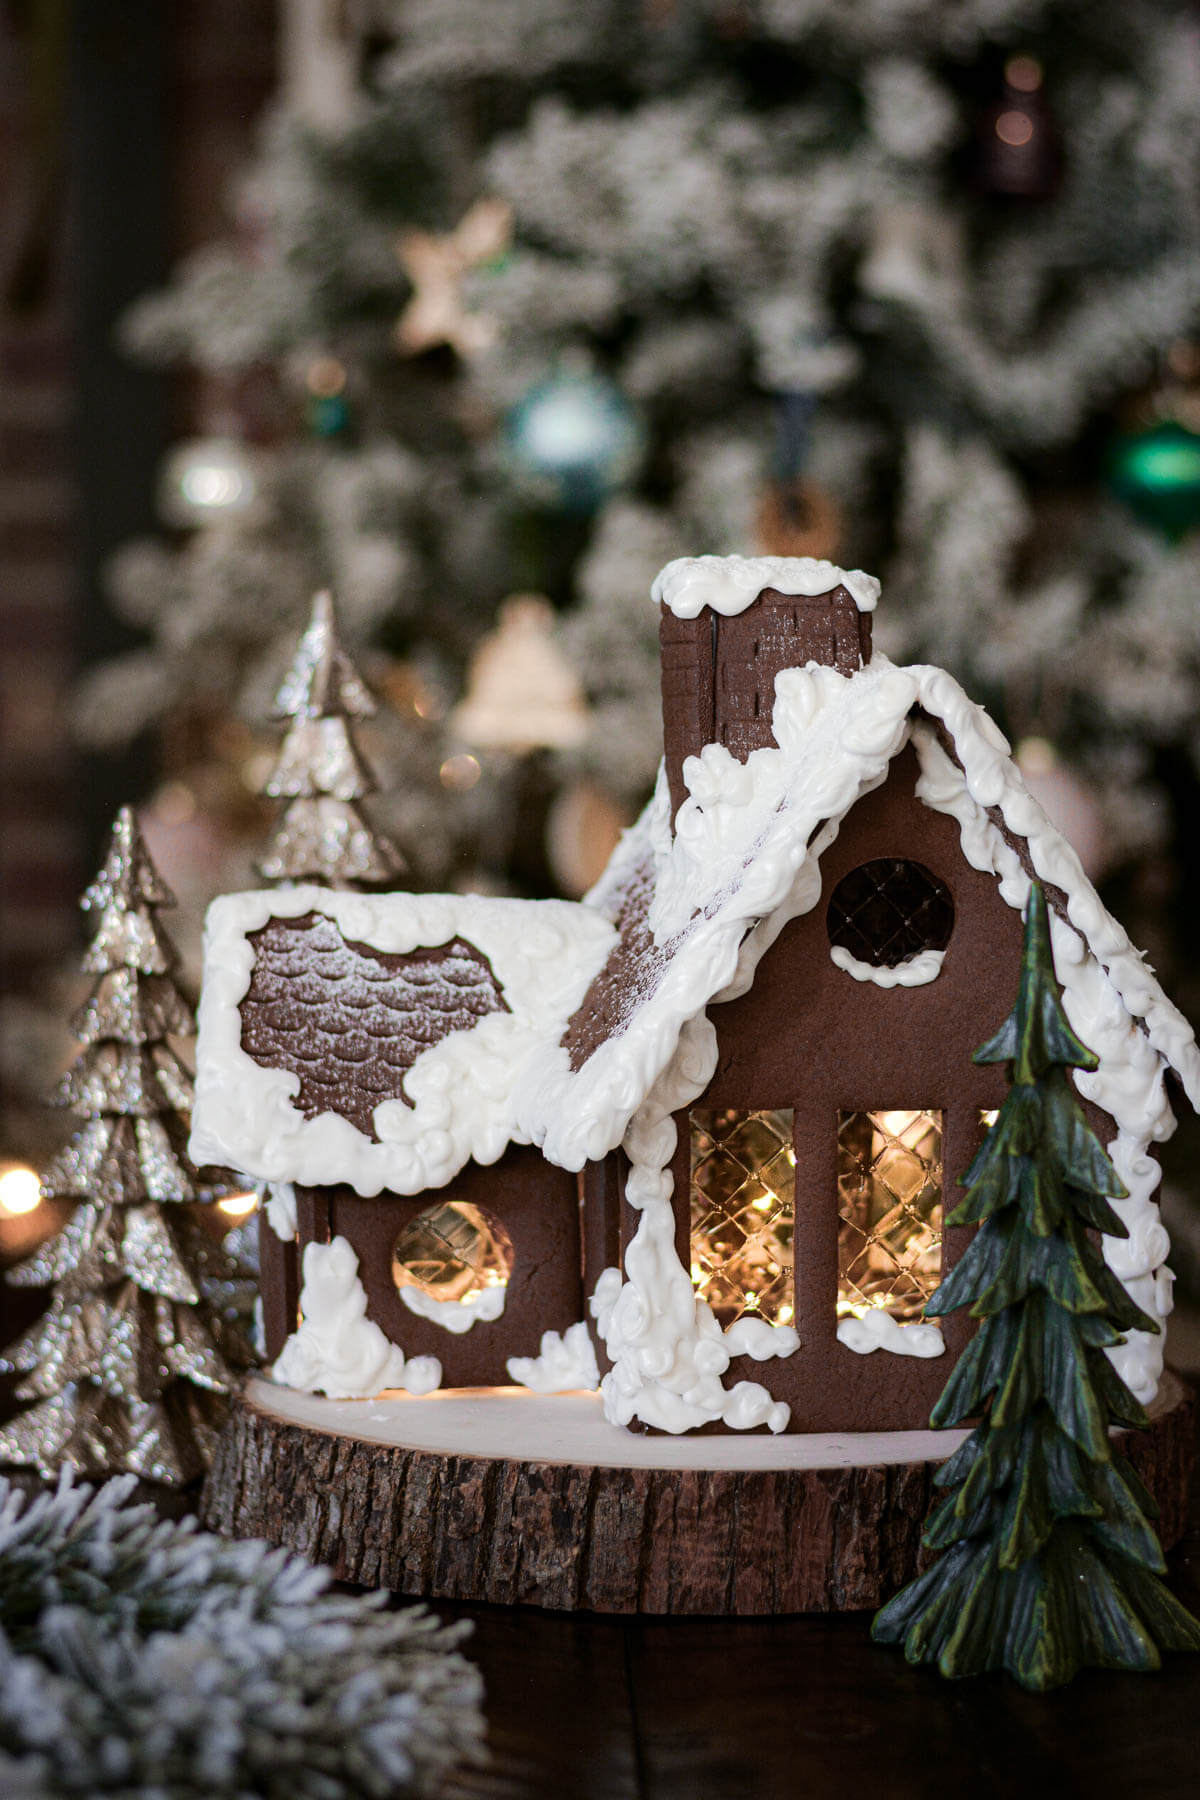 A homemade gingerbread house sitting in front of a Christmas tree.